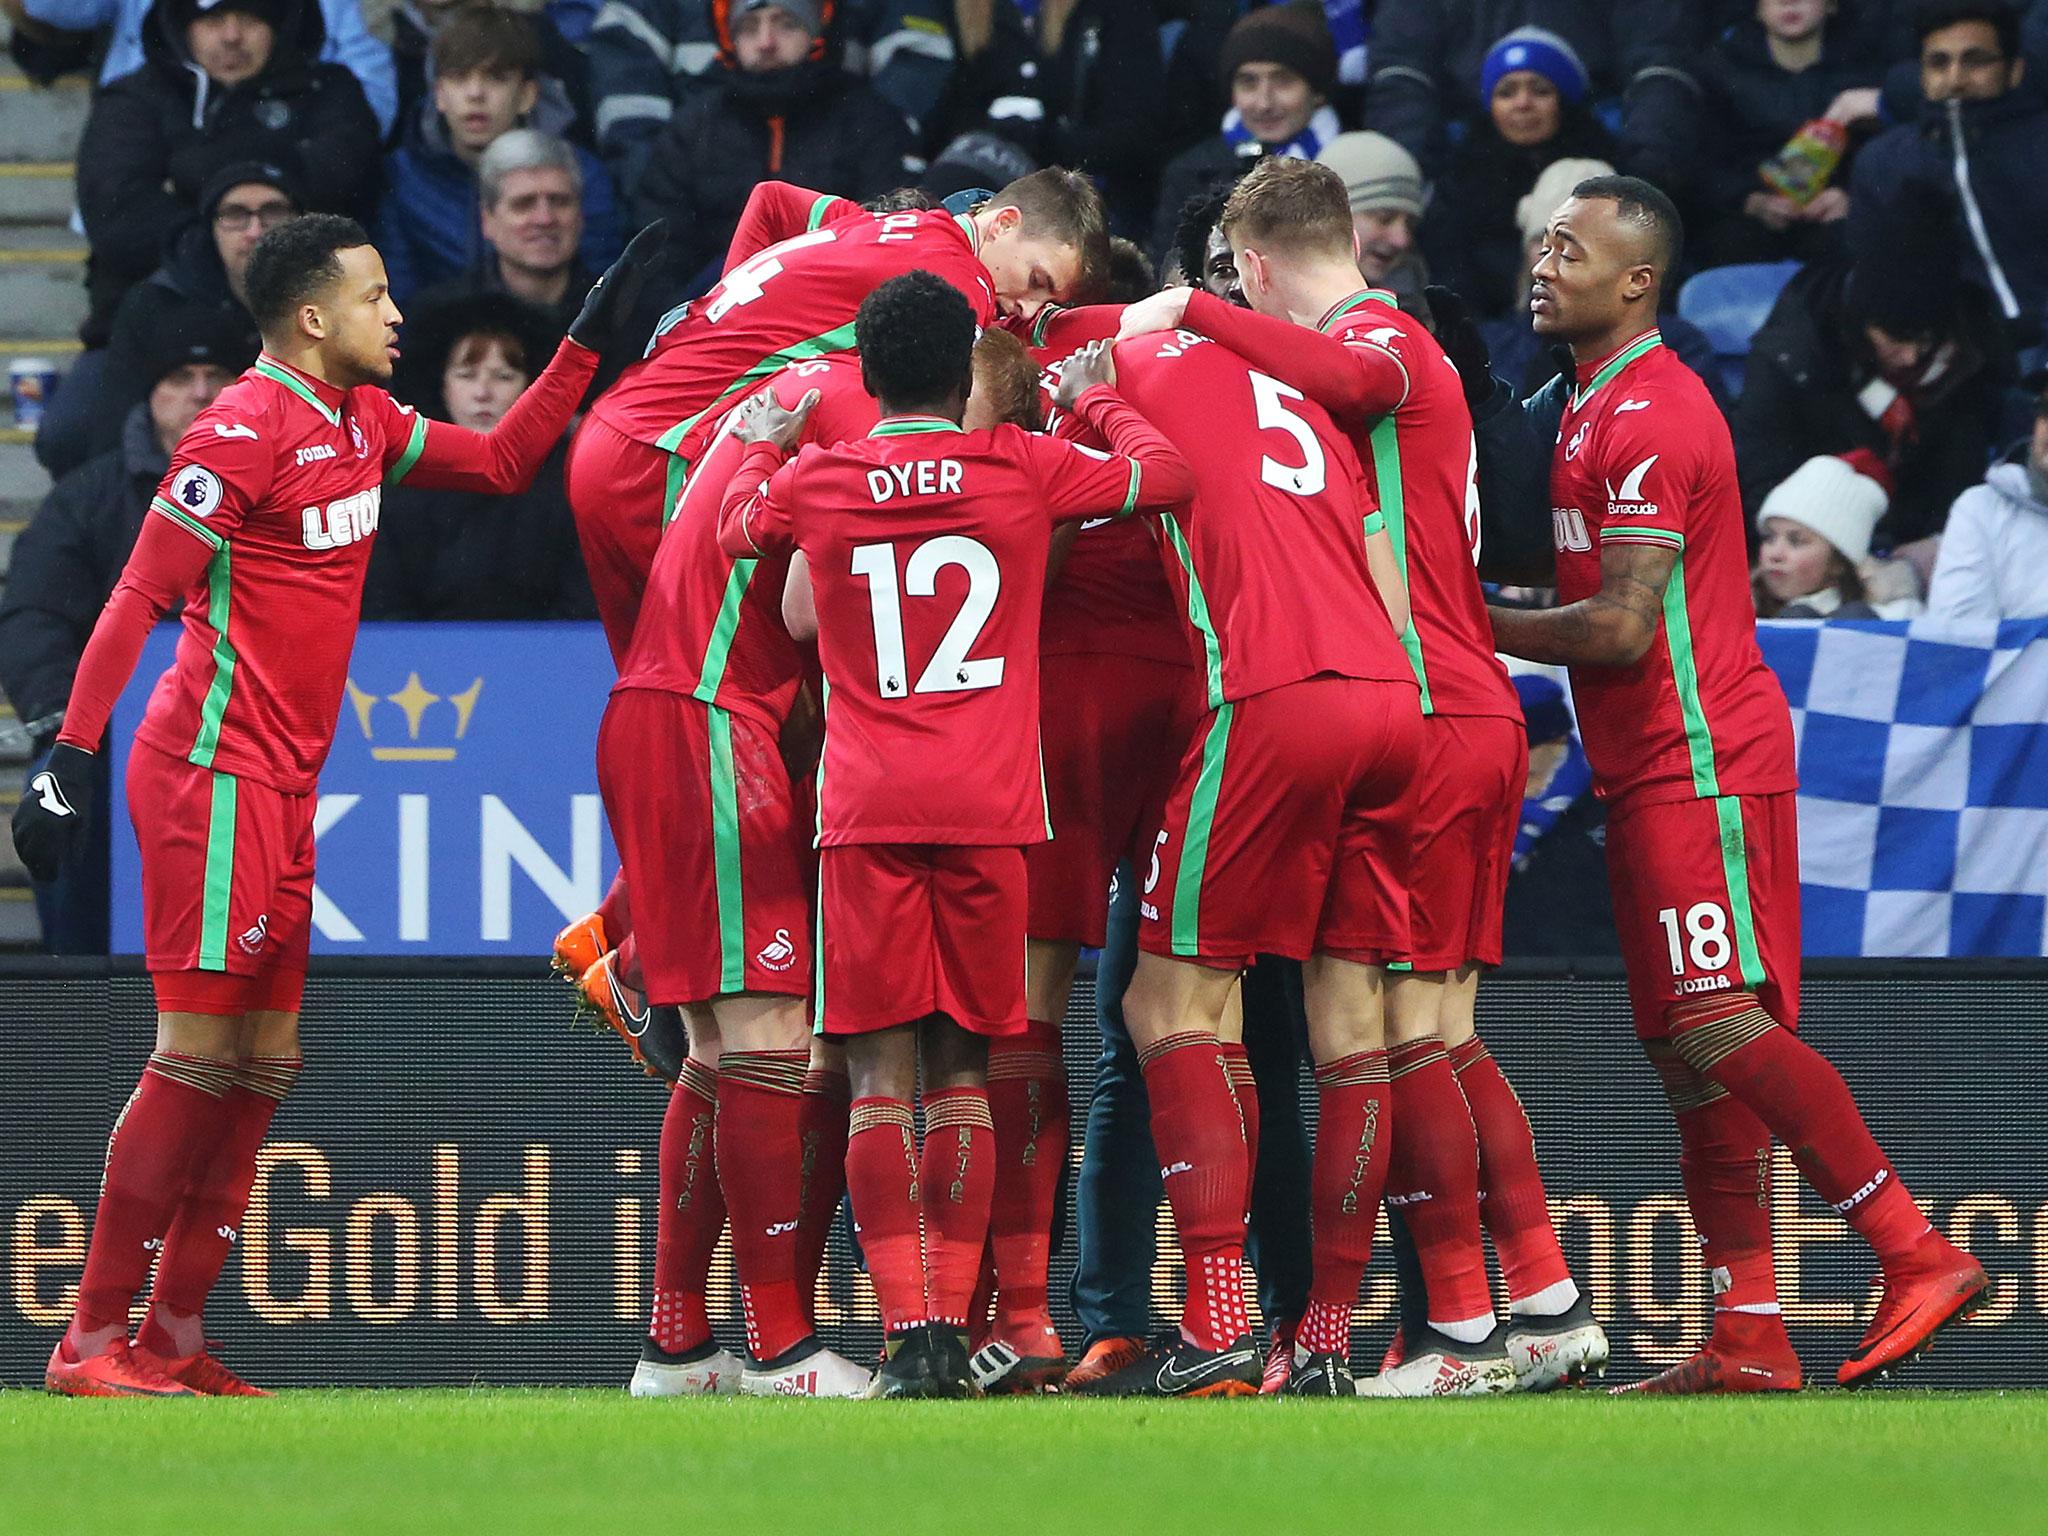 Swansea's players congratulate Federico Fernandez after his equaliser